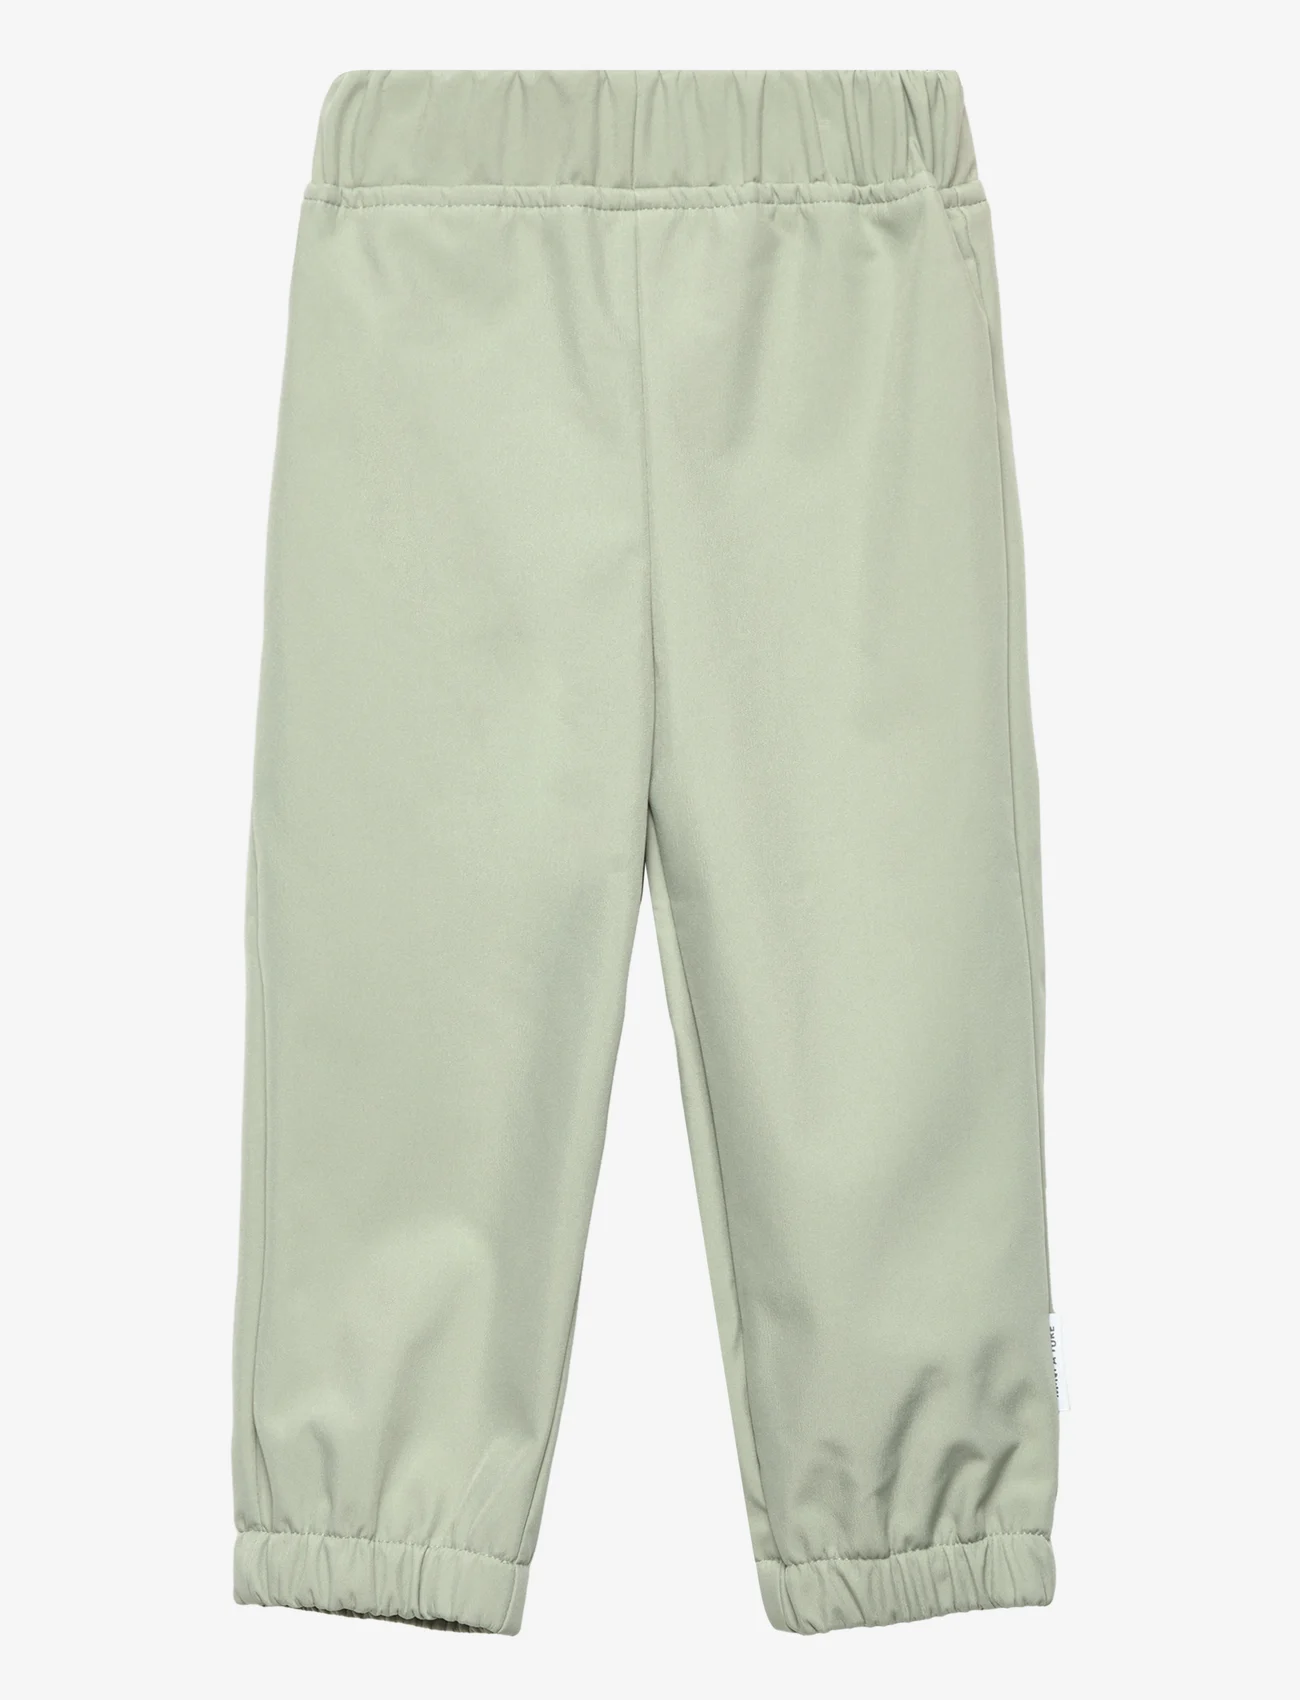 Mini A Ture - Aian spring softshell pants - seagrass - 0